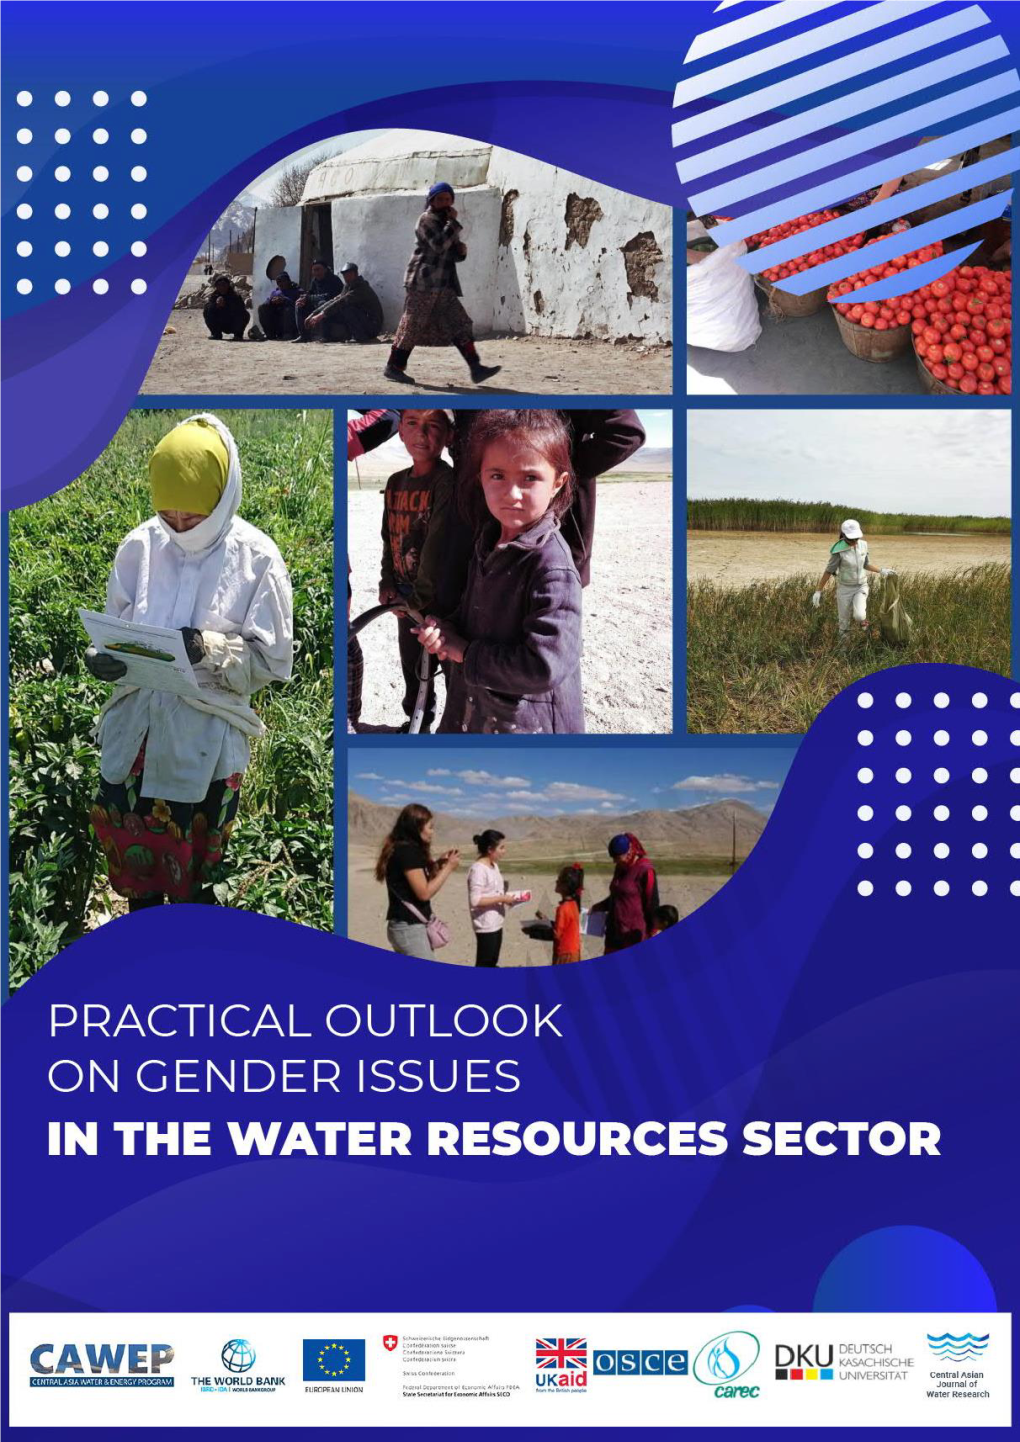 Practical Outlook on Gender Issues in the Water Resources Sector 2